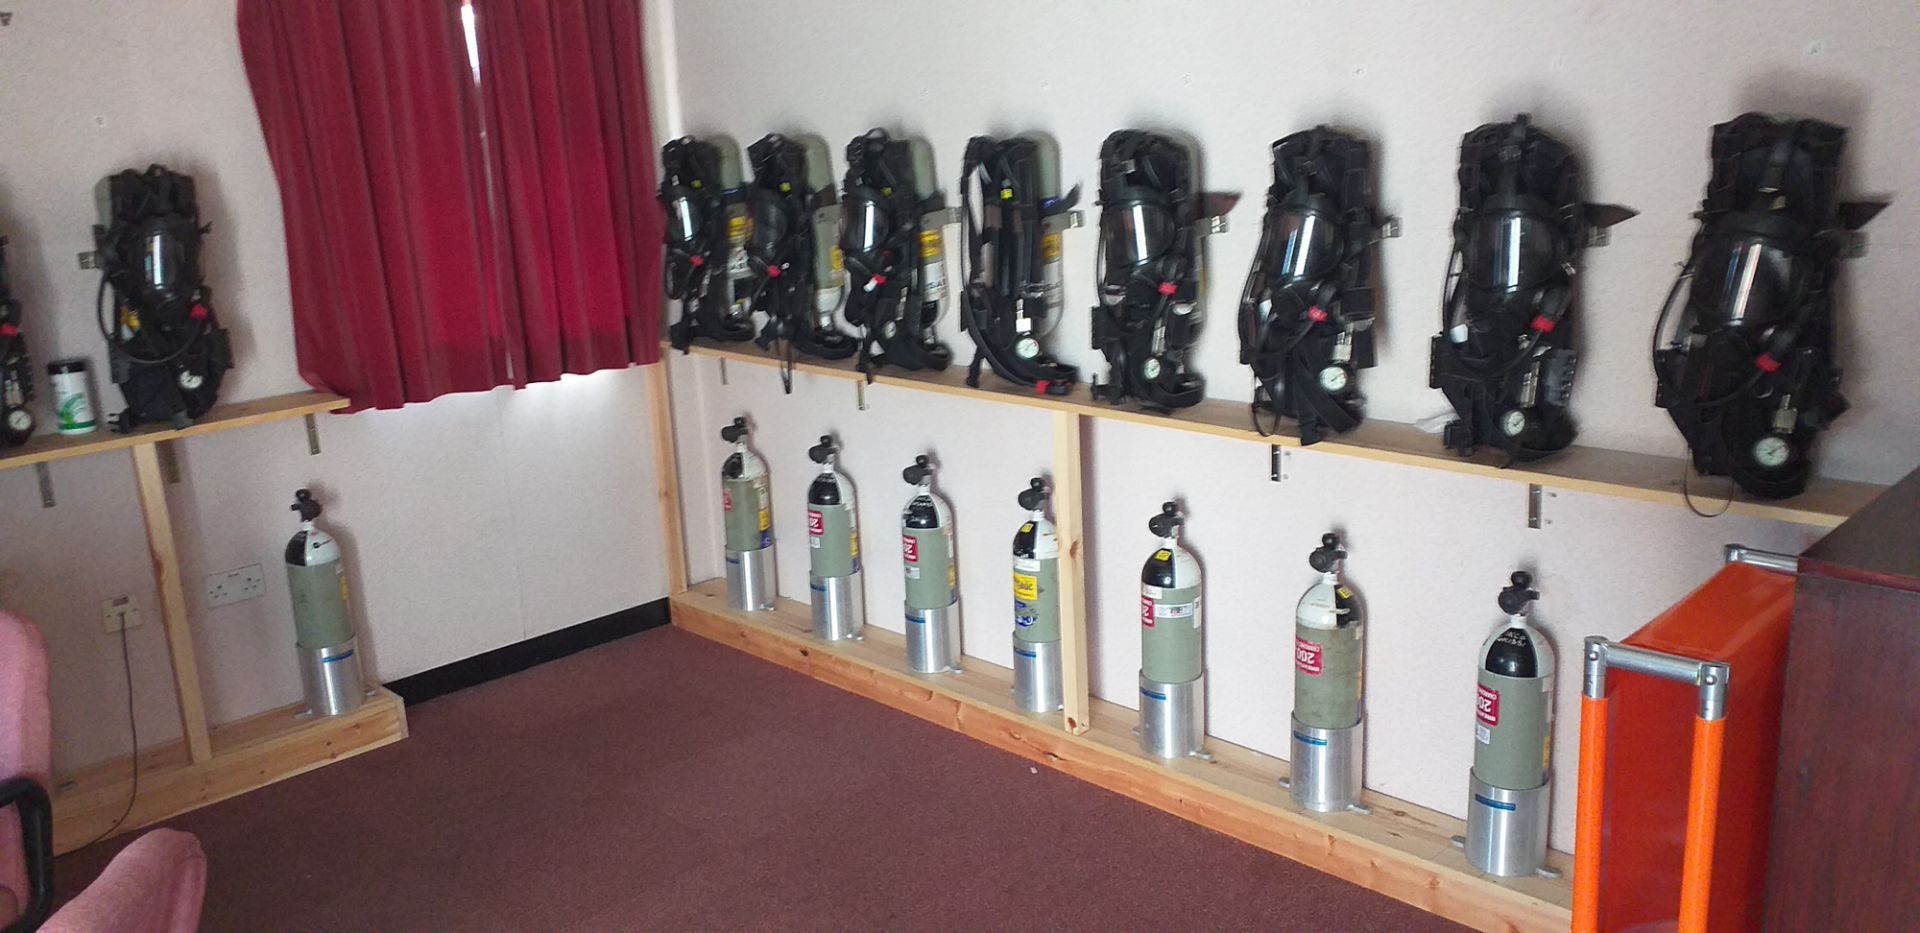 12 REPACEMENT OXYGEN GAS CYLINDERS [RIGGING FEES FOR LOT #2026 - £150 PLUS APPLICABLE TAXES]